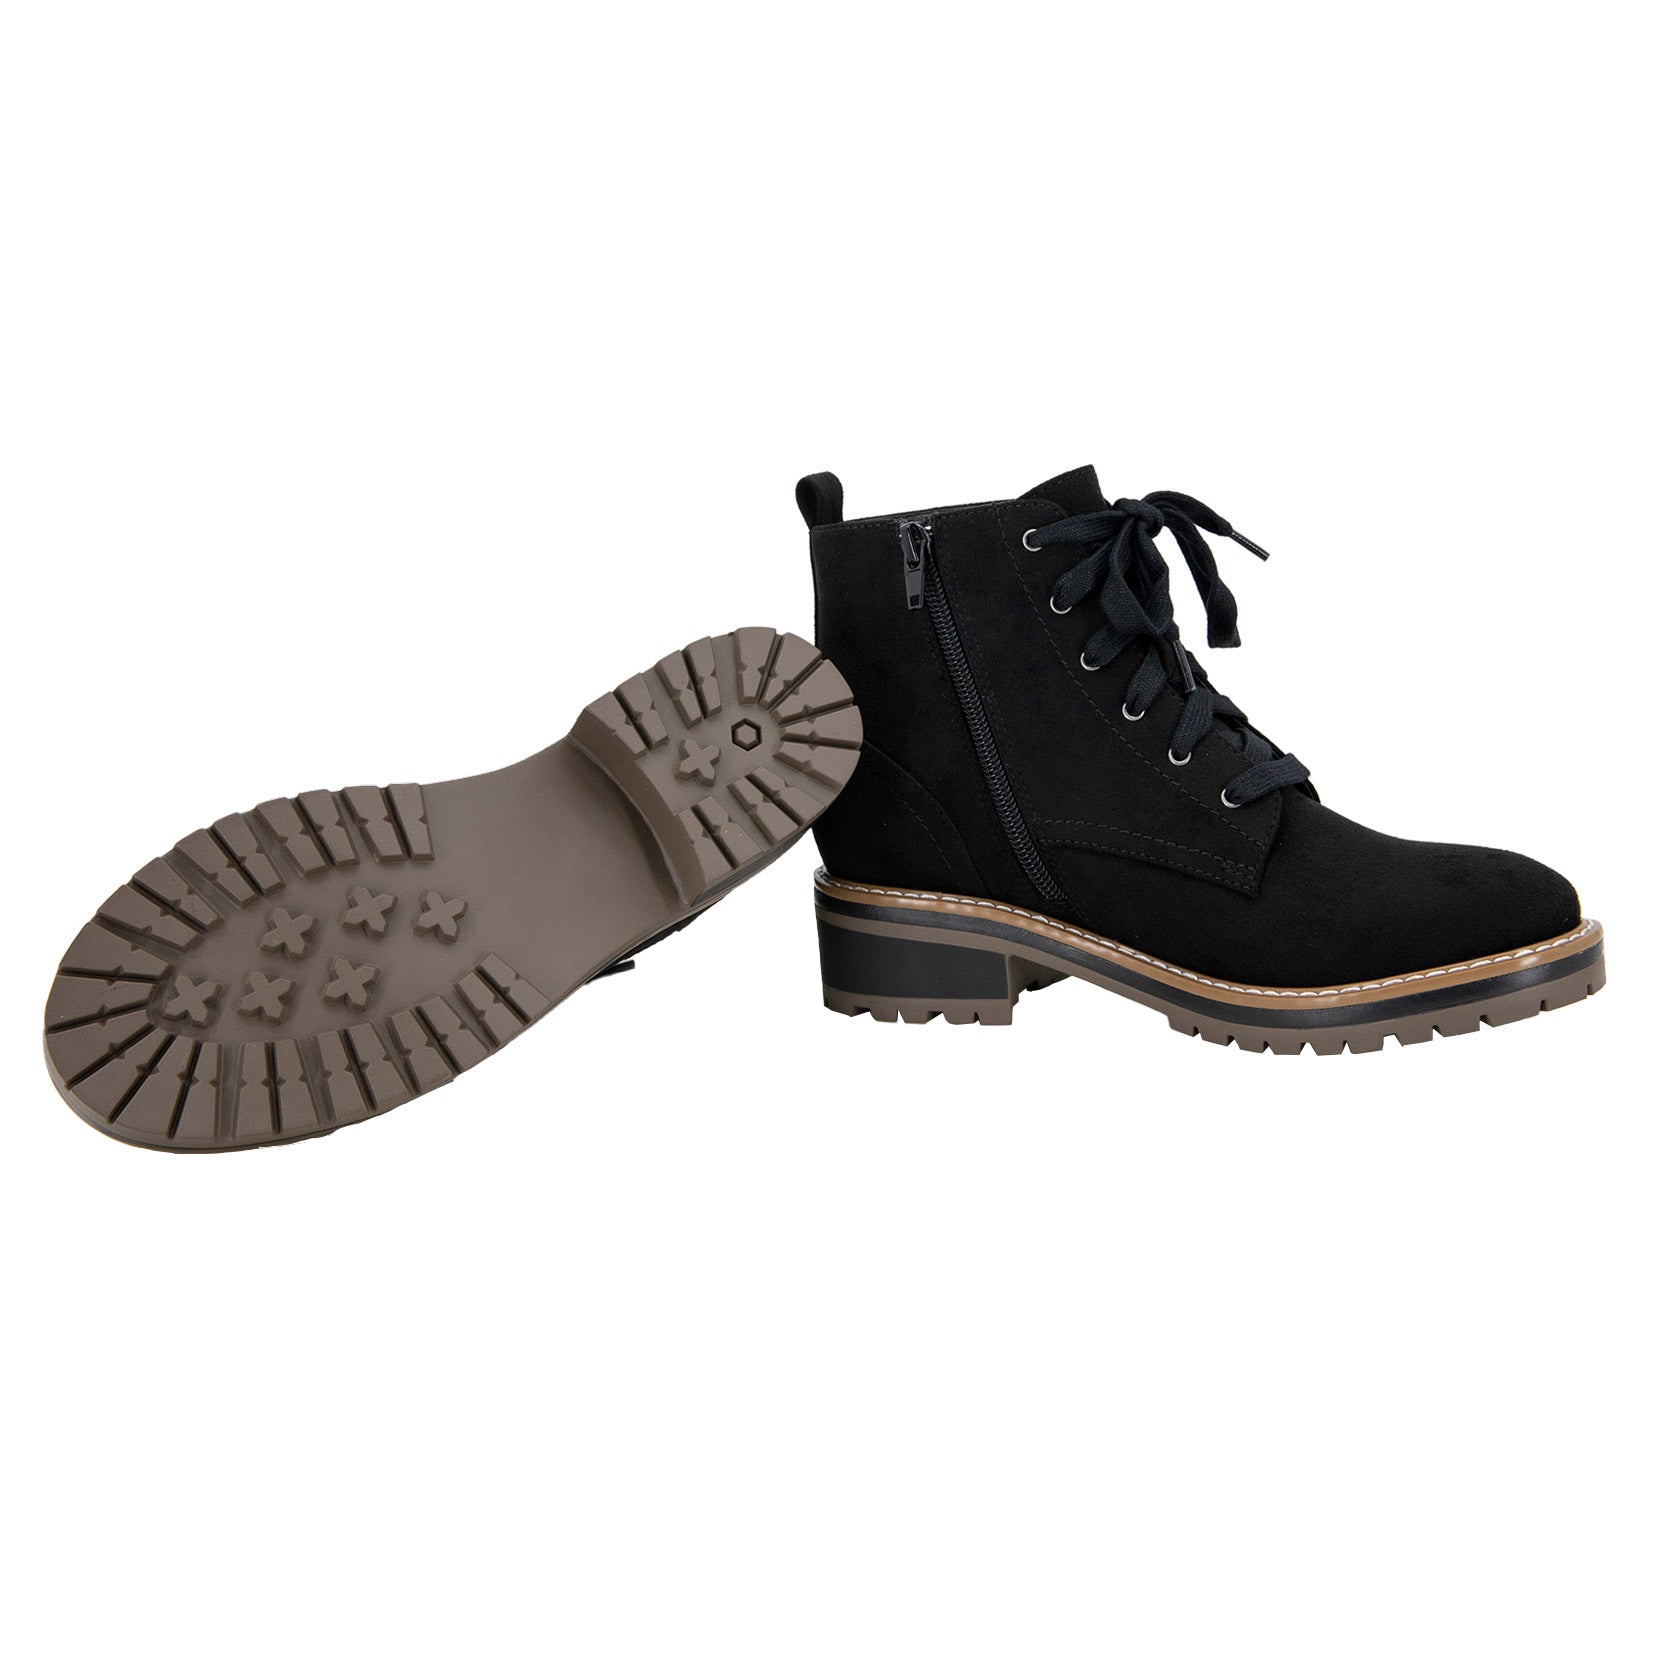 Ladies' Lace up Boot